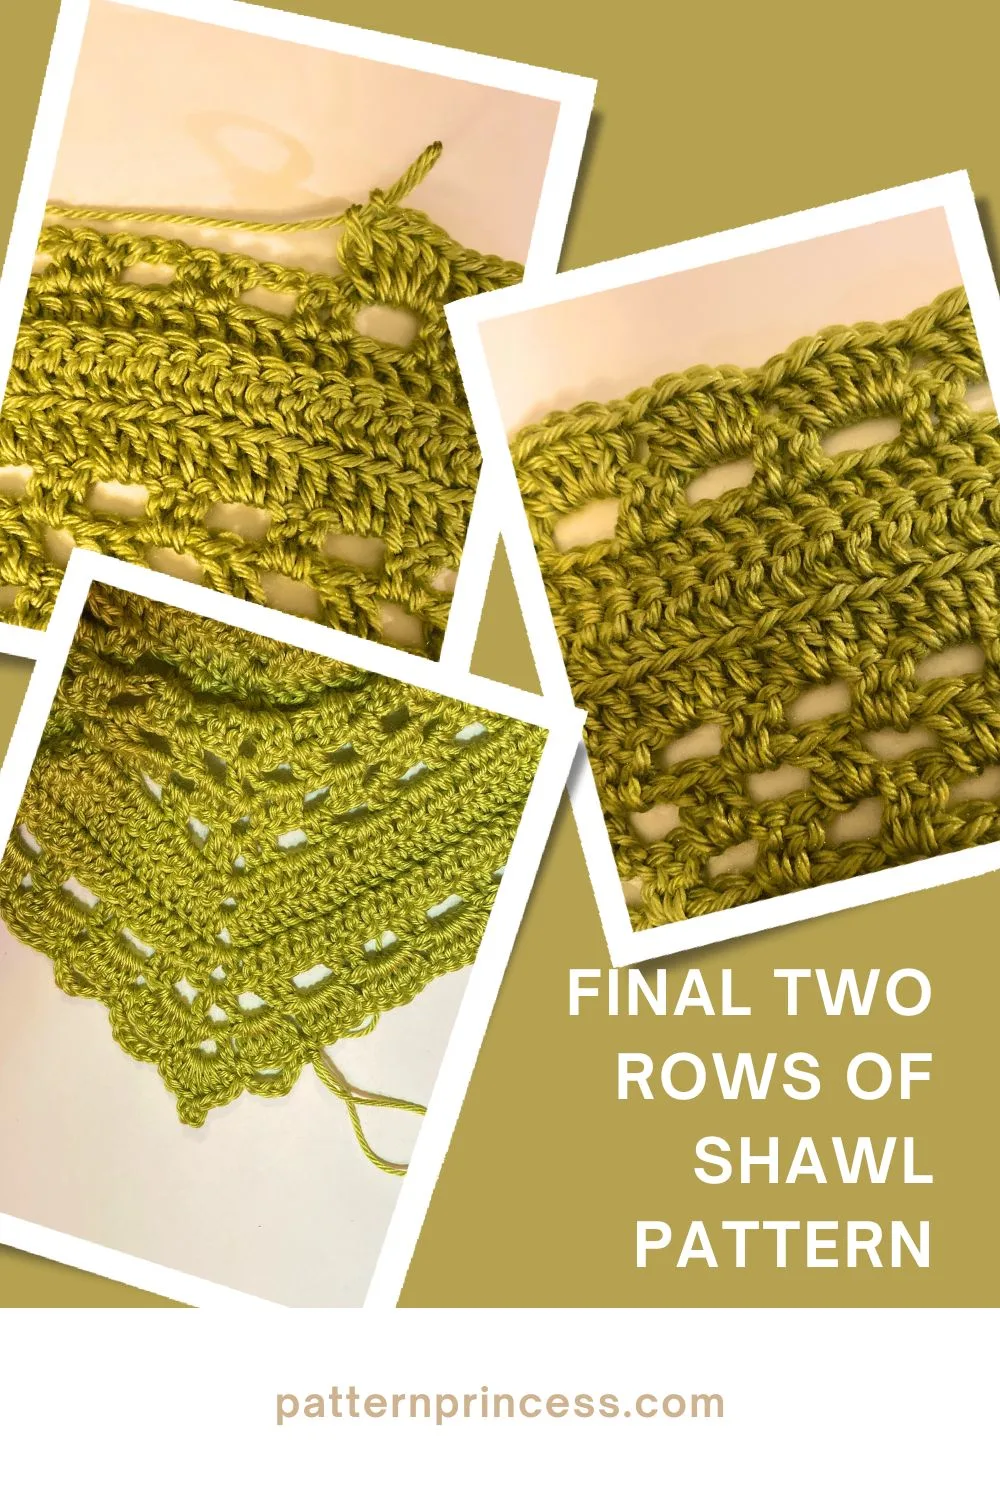 Final Two Rows of Shawl Pattern